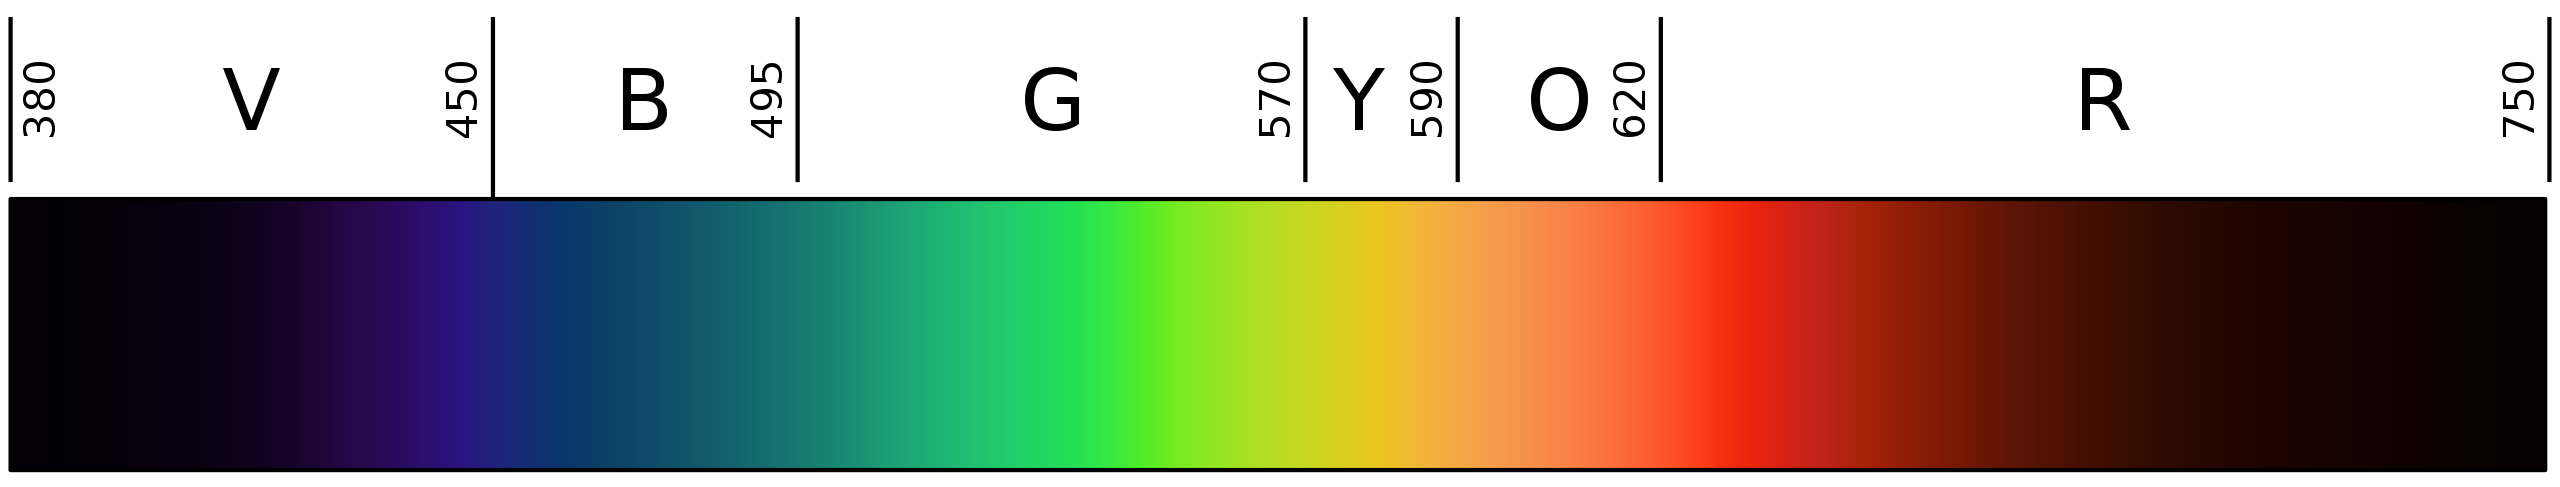 Visible light spectrum showing the colors of light from about 380 nanometers in violet to 750 nanometers in red, with the colors blue, green, yellow, and orange in between from shortest to longest wavelength.